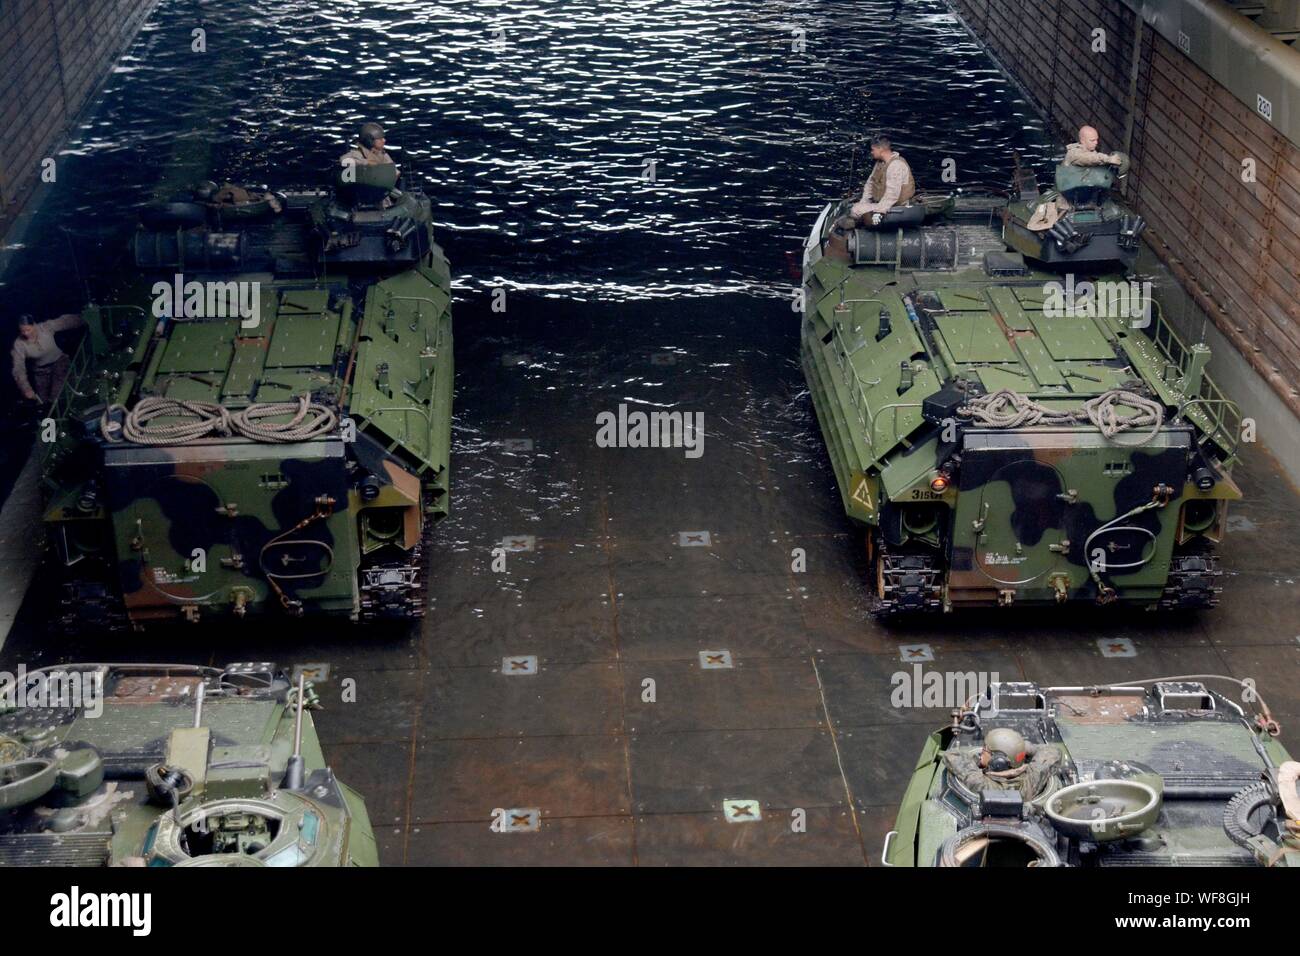 190822-N-XN177-0104 PACIFIC OCEAN (Aug. 22, 2019) – Assault amphibious vehicles (AAV) prepare to depart the well deck of the dock landing ship USS Comstock (LSD 45). Comstock is currently underway conducting routine operations. This year USS Comstock will participate in the U.S. Navy Fleet Weeks in Los Angeles and San Francisco. (U.S. Navy Photo by Mass Communication Specialist 1st Class Peter Burghart/Released) Stock Photo